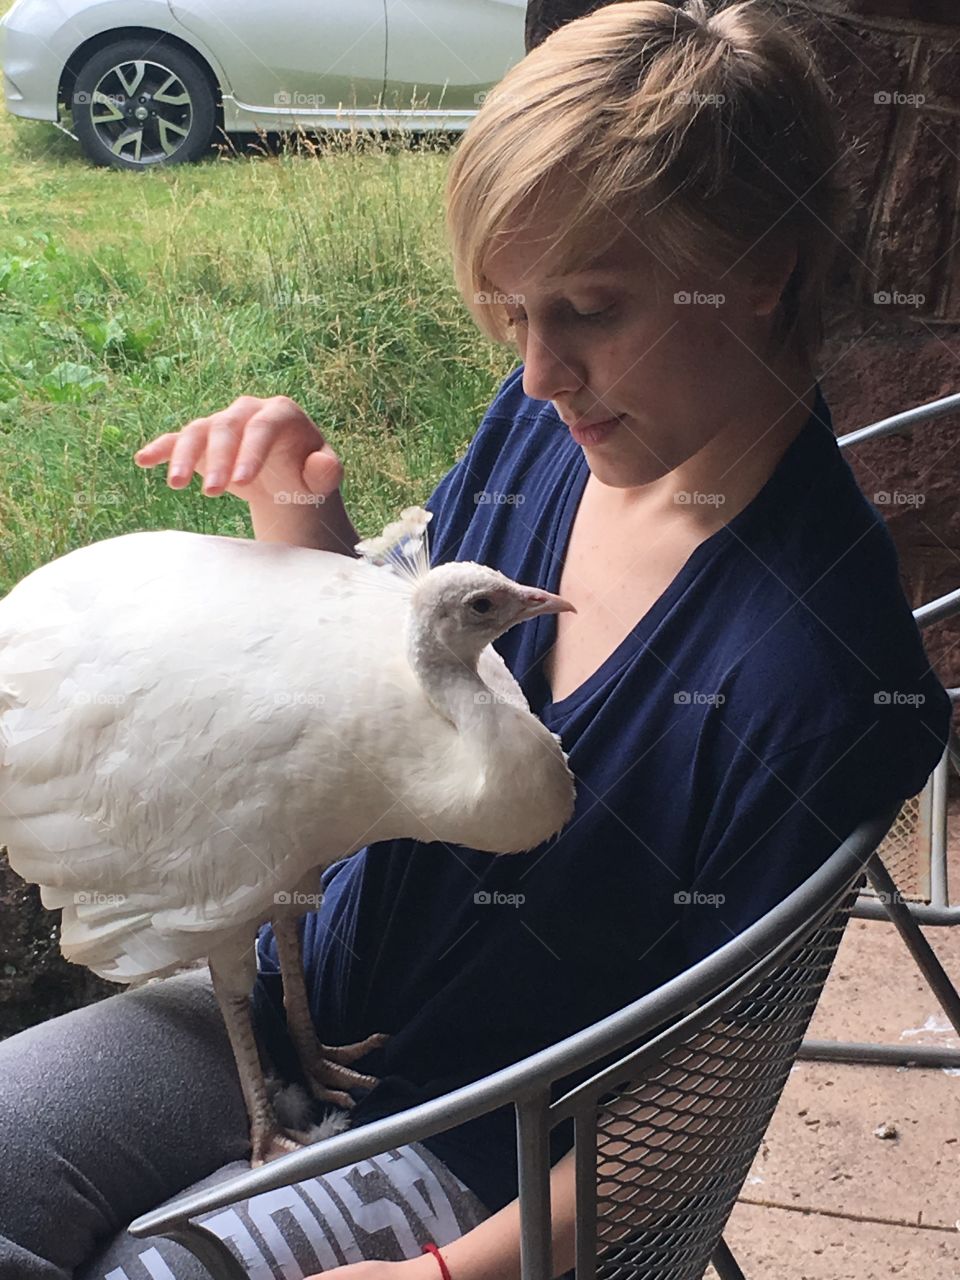 My sweet leucistic peacock hangs out in my lap as I pet and kiss him. He’s naturally white, and is my best friend